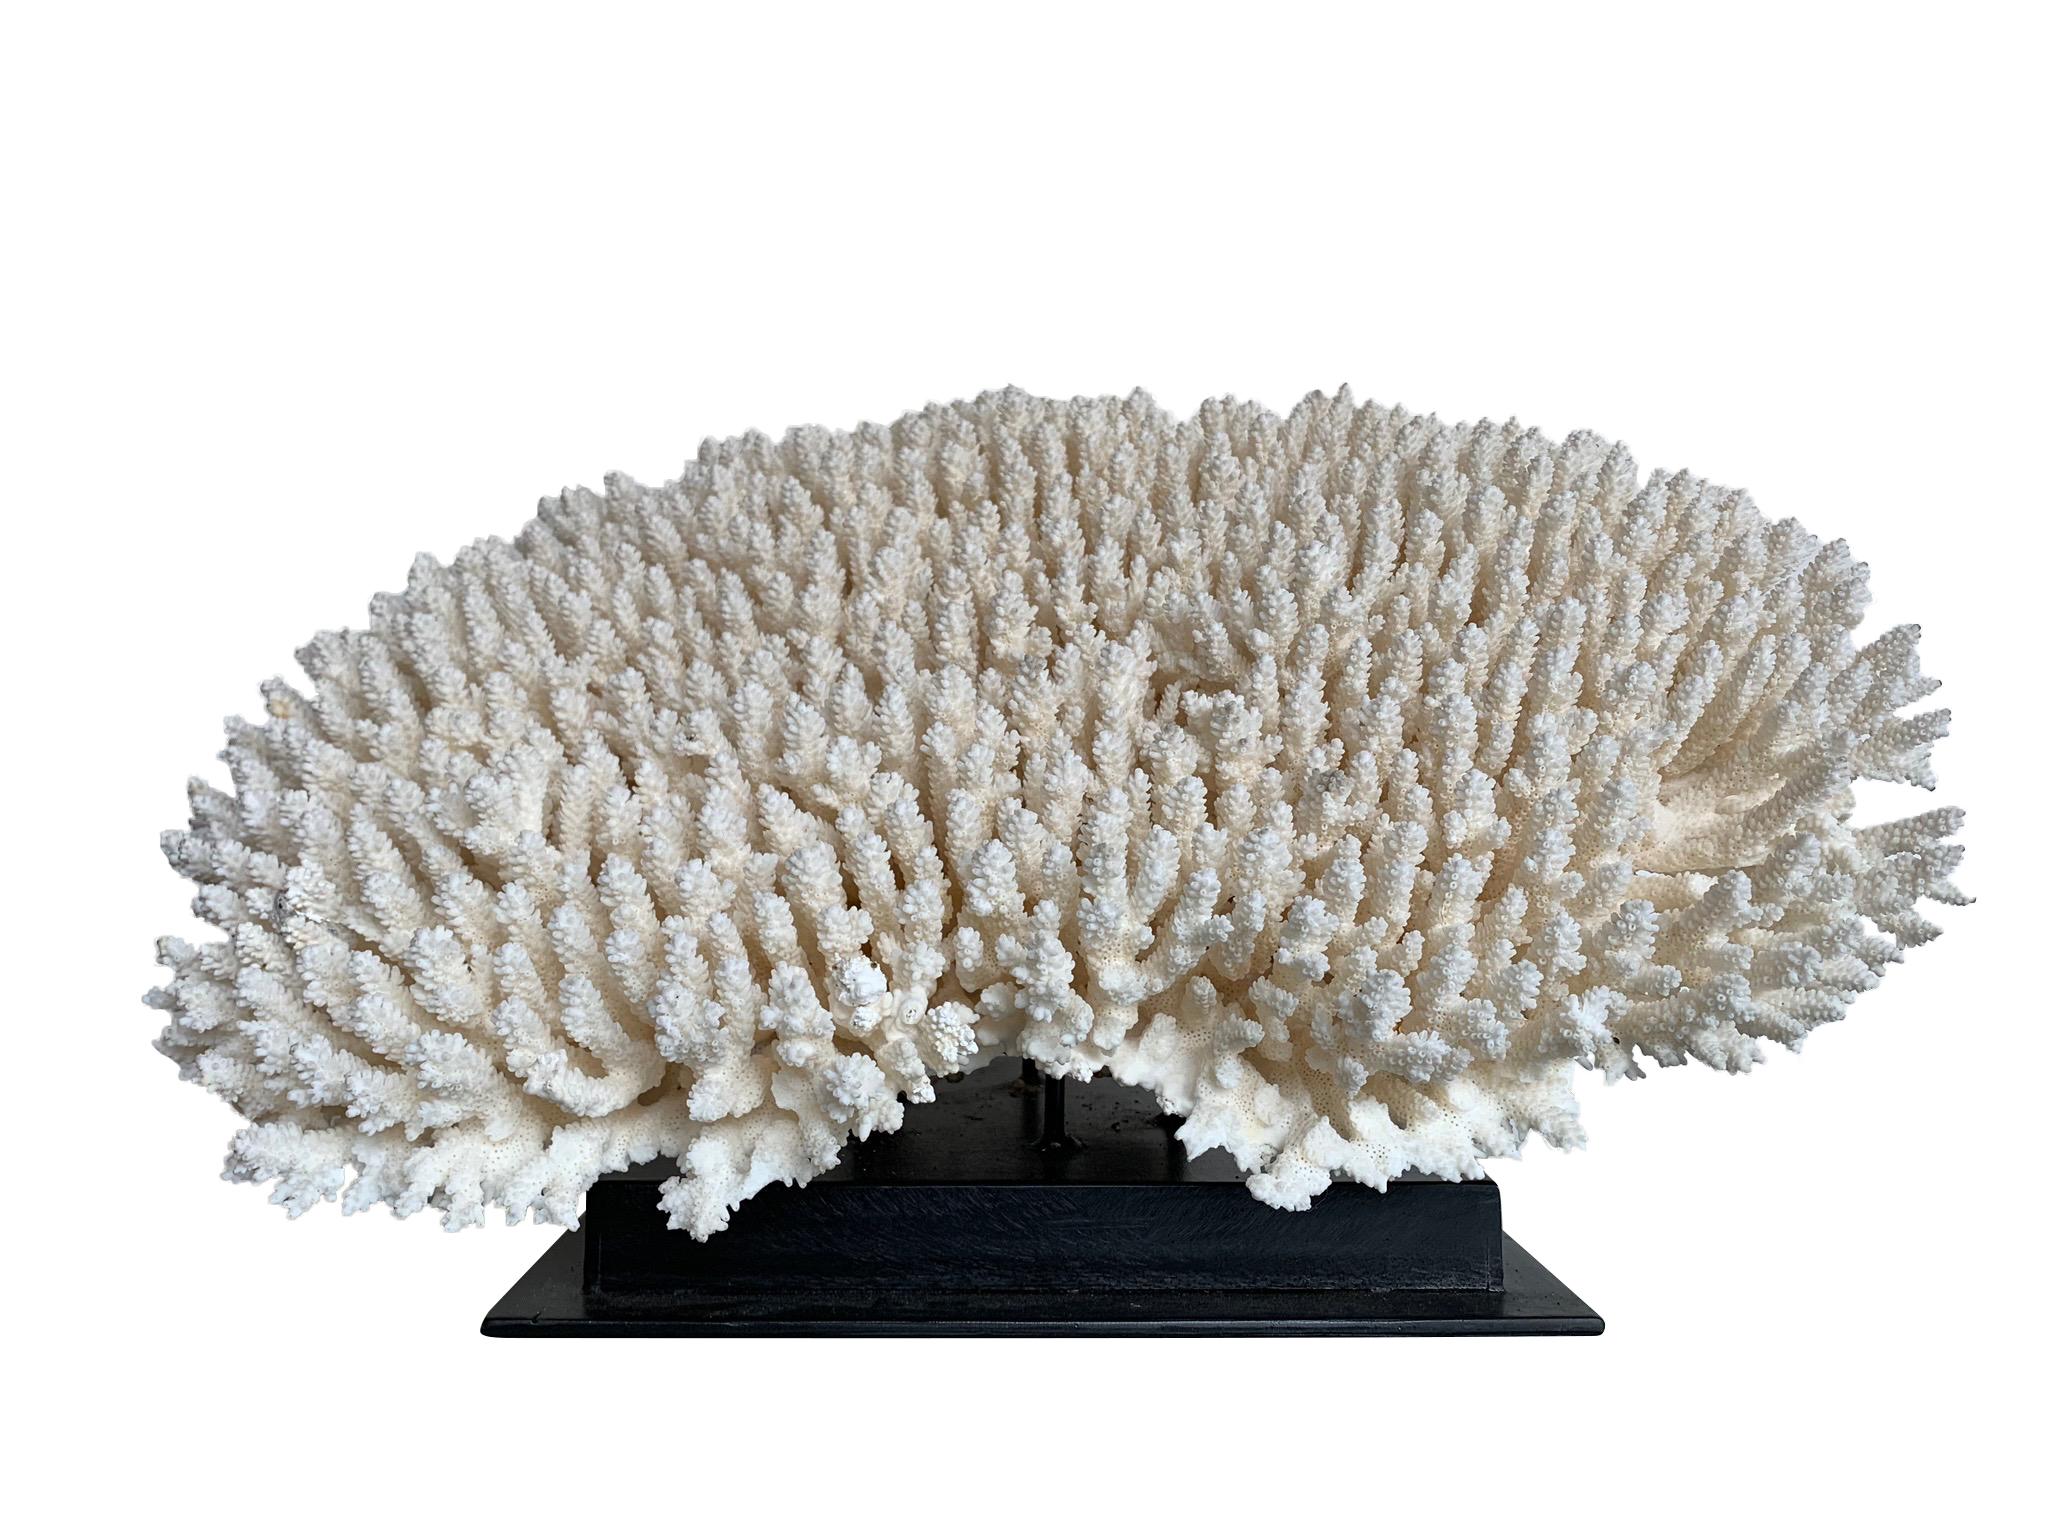 A stunning large antique brush coral specimen mounted on a black metal museum stand. This is a fantastic antique specimen that came from a Belgian collection and is a magnificent size in great condition.

Latin Name: for Brush Coral is Acropora